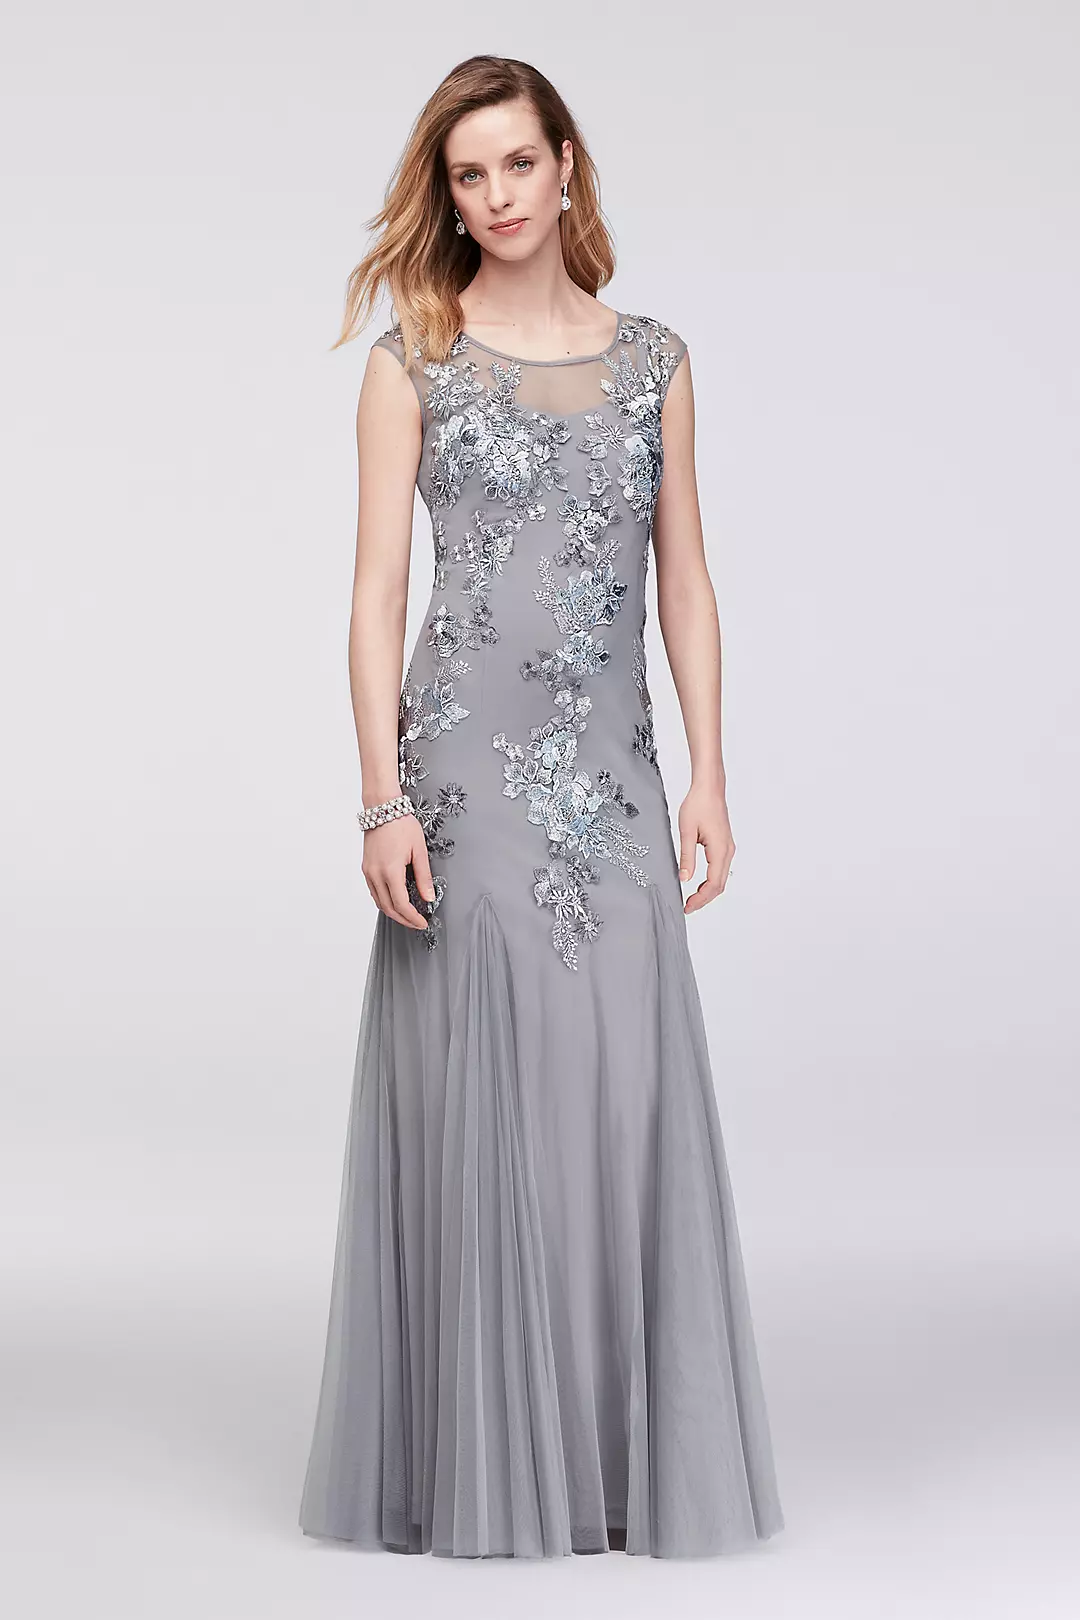 Beaded and Embroidered Illusion Mesh Trumpet Gown Image